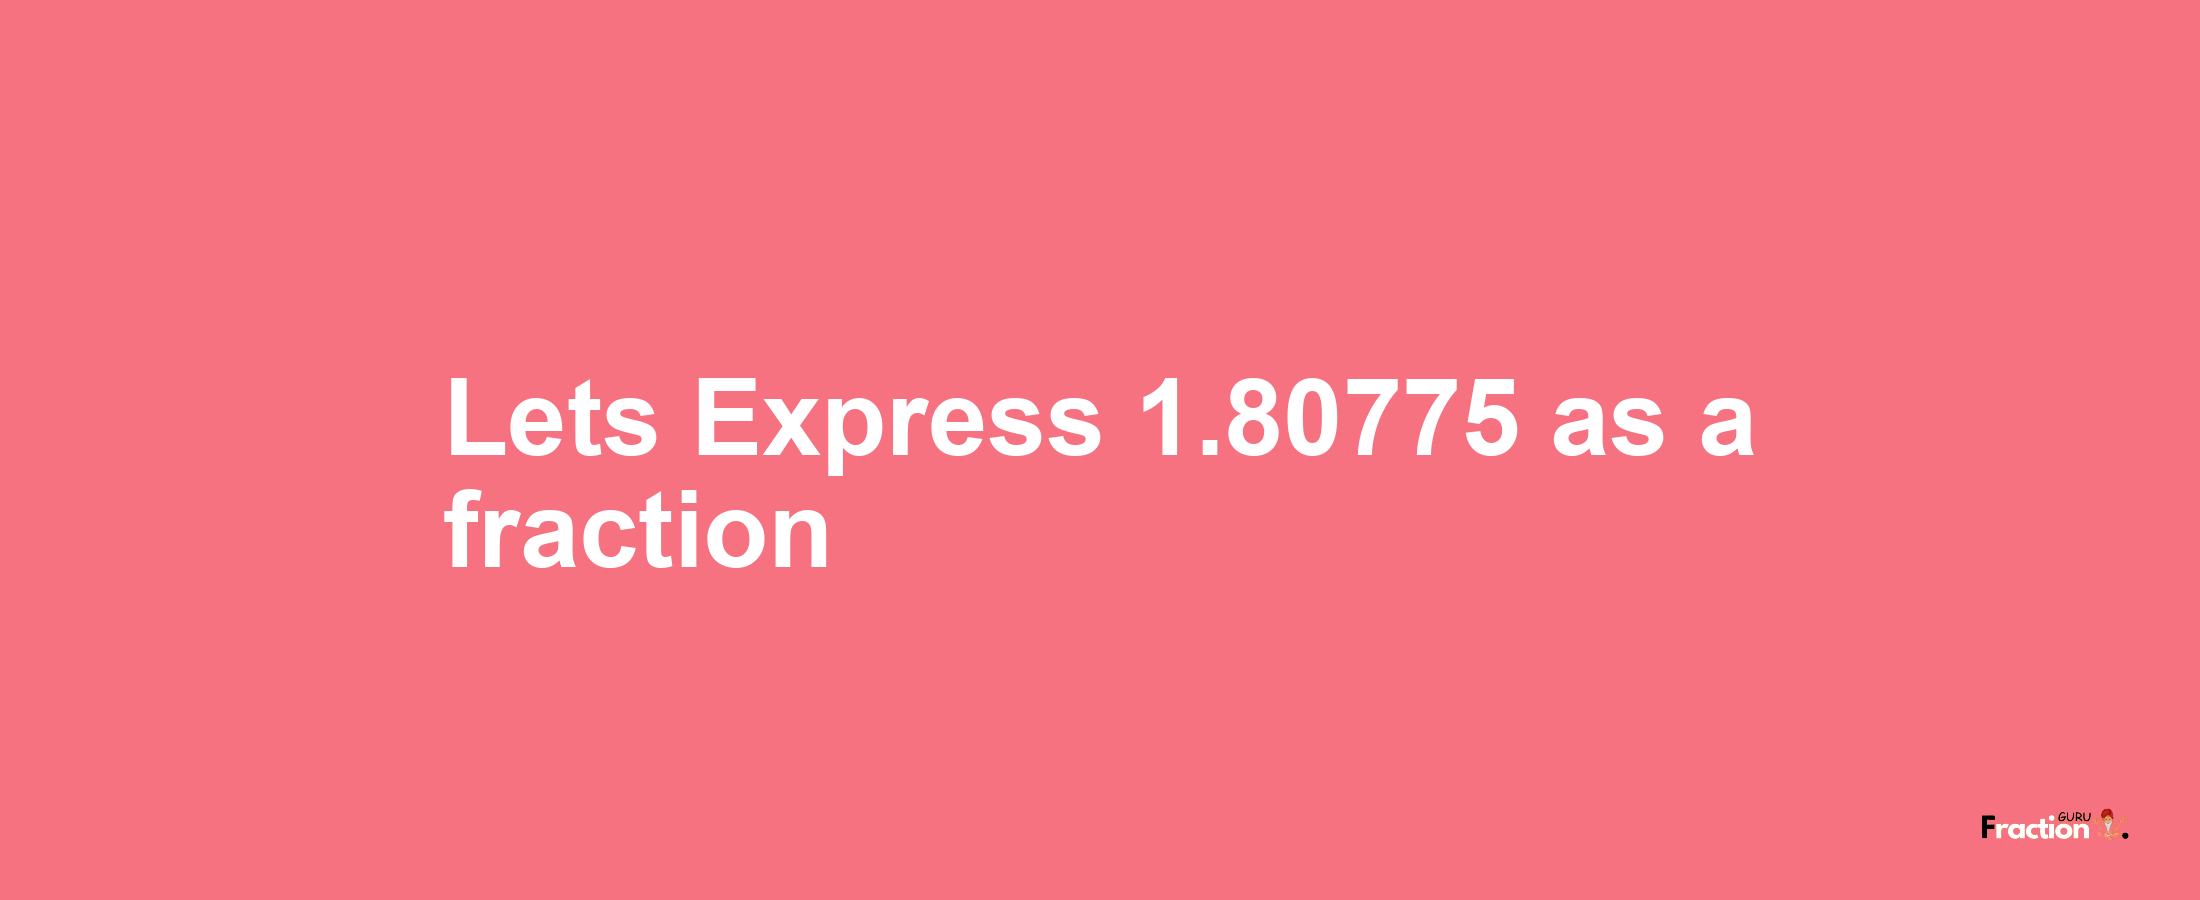 Lets Express 1.80775 as afraction